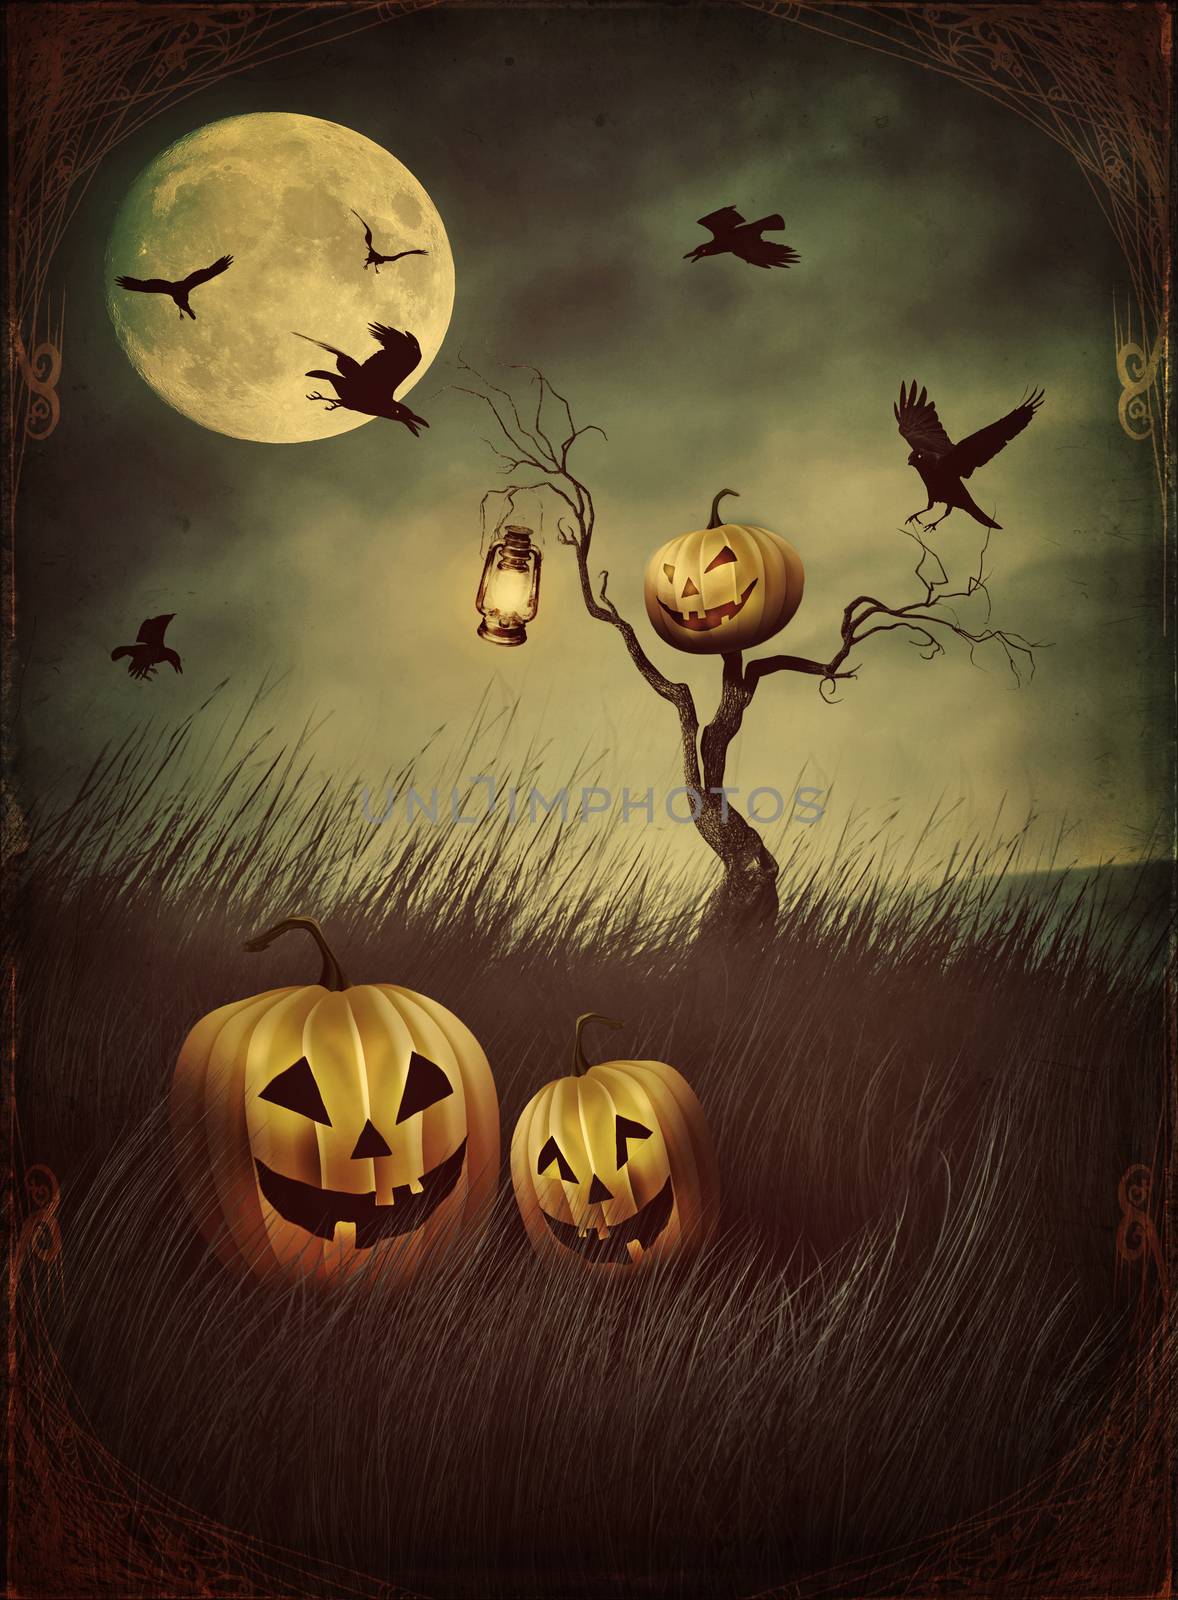 Pumpkin scarecrow in fields at night with vintage look by Sandralise